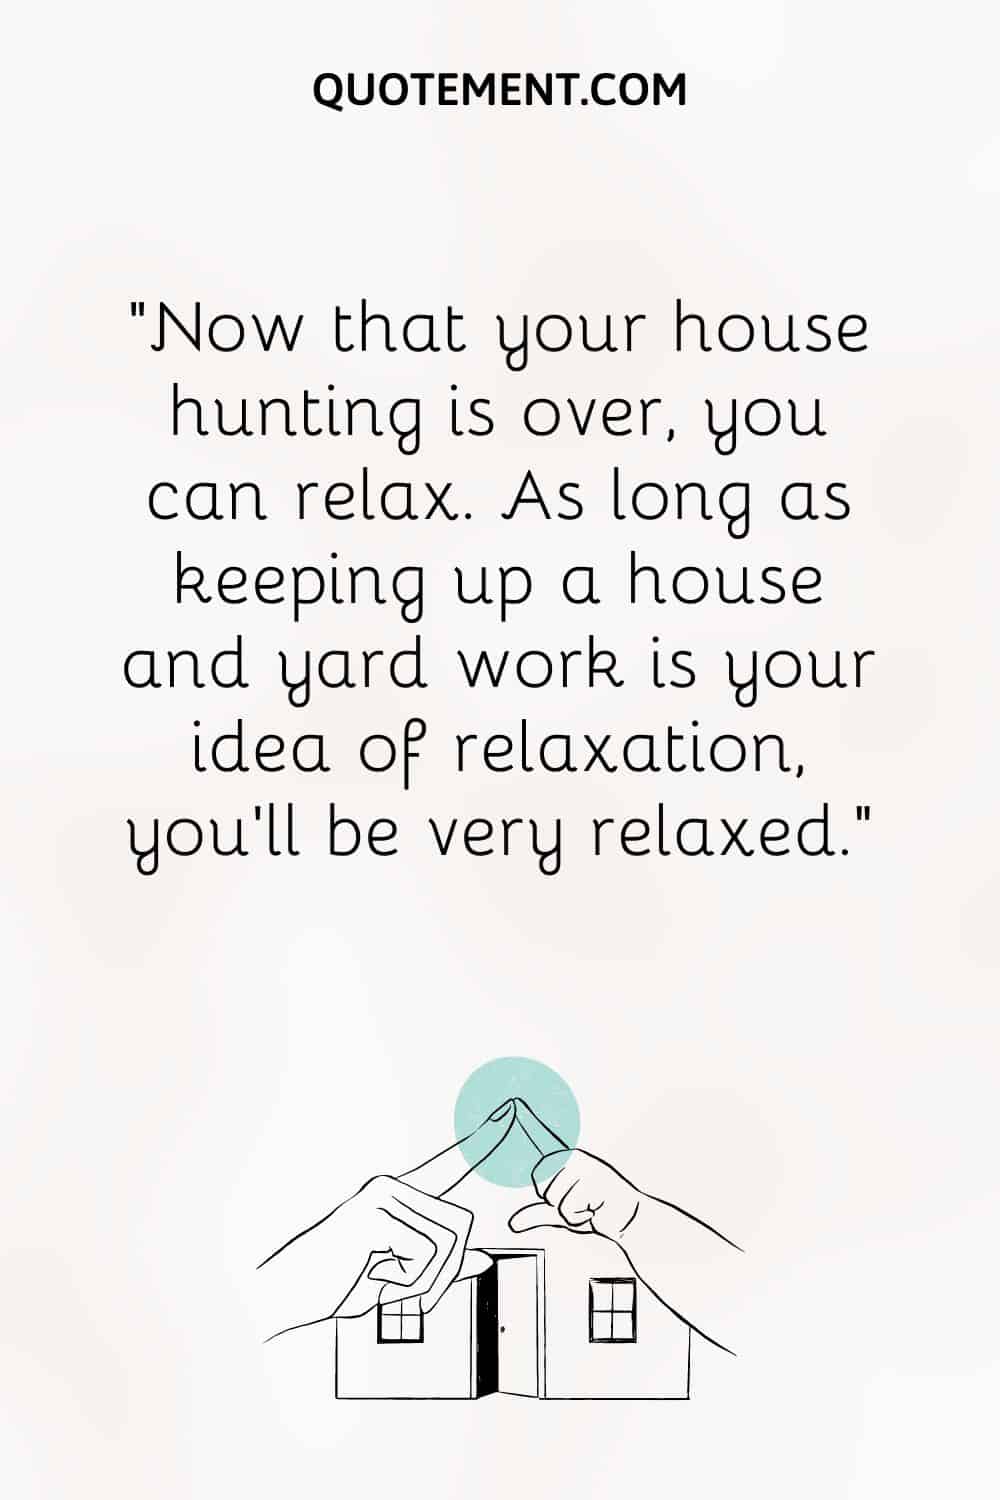 As long as keeping up a house and yard work is your idea of relaxation, you’ll be very relaxed